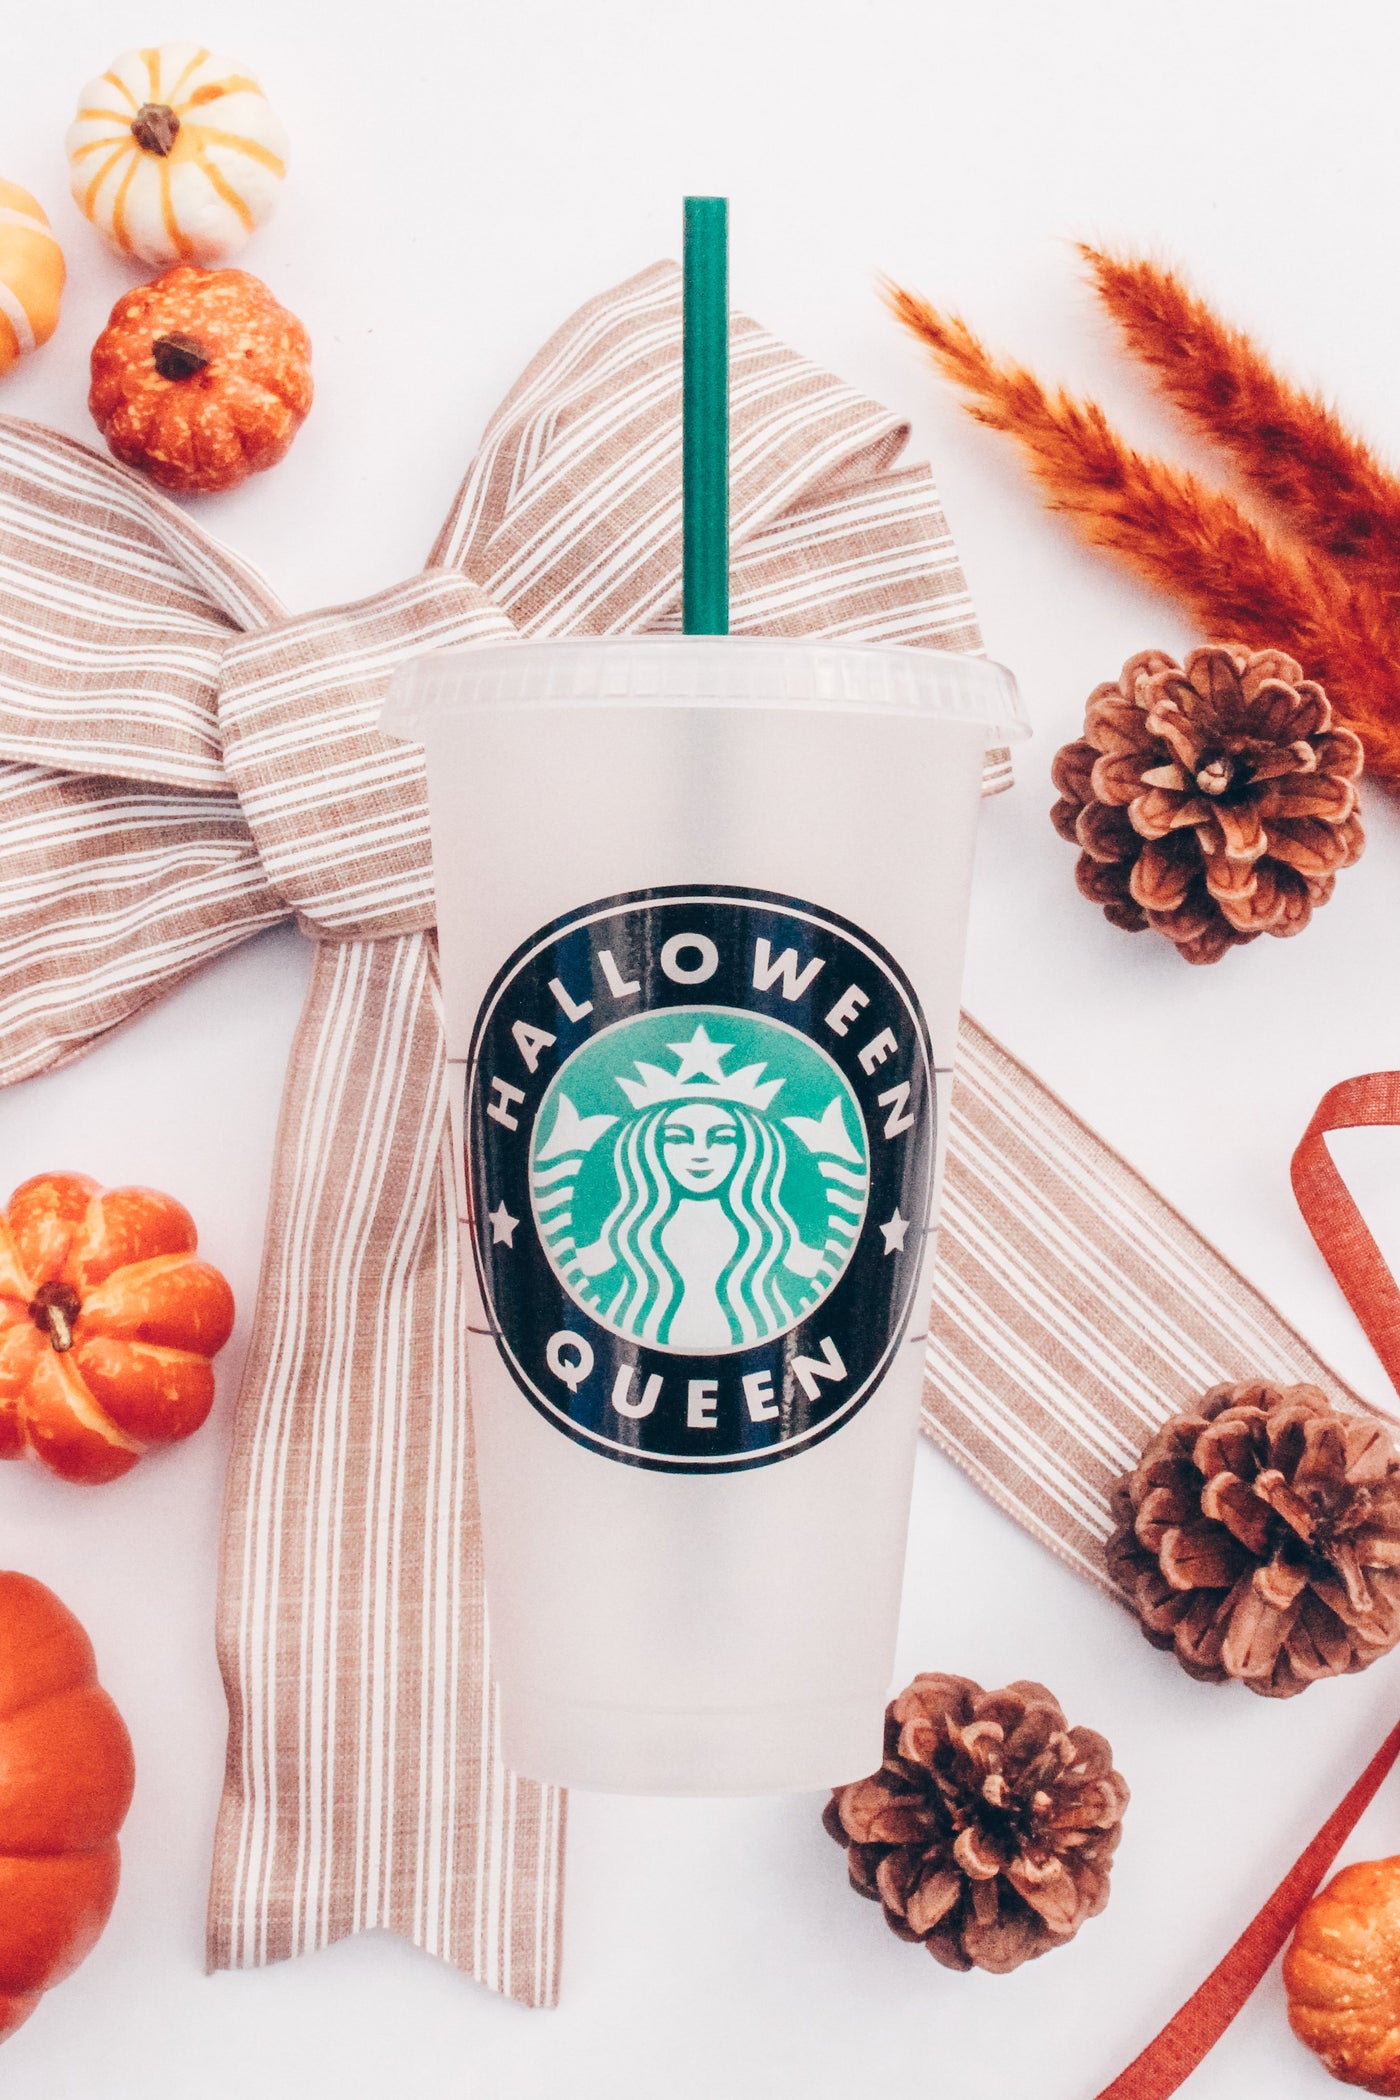 A frosted white reusable plastic Venti Starbucks cup with the Starbucks logo that reads Halloween Queen set among fall and Halloween type decor